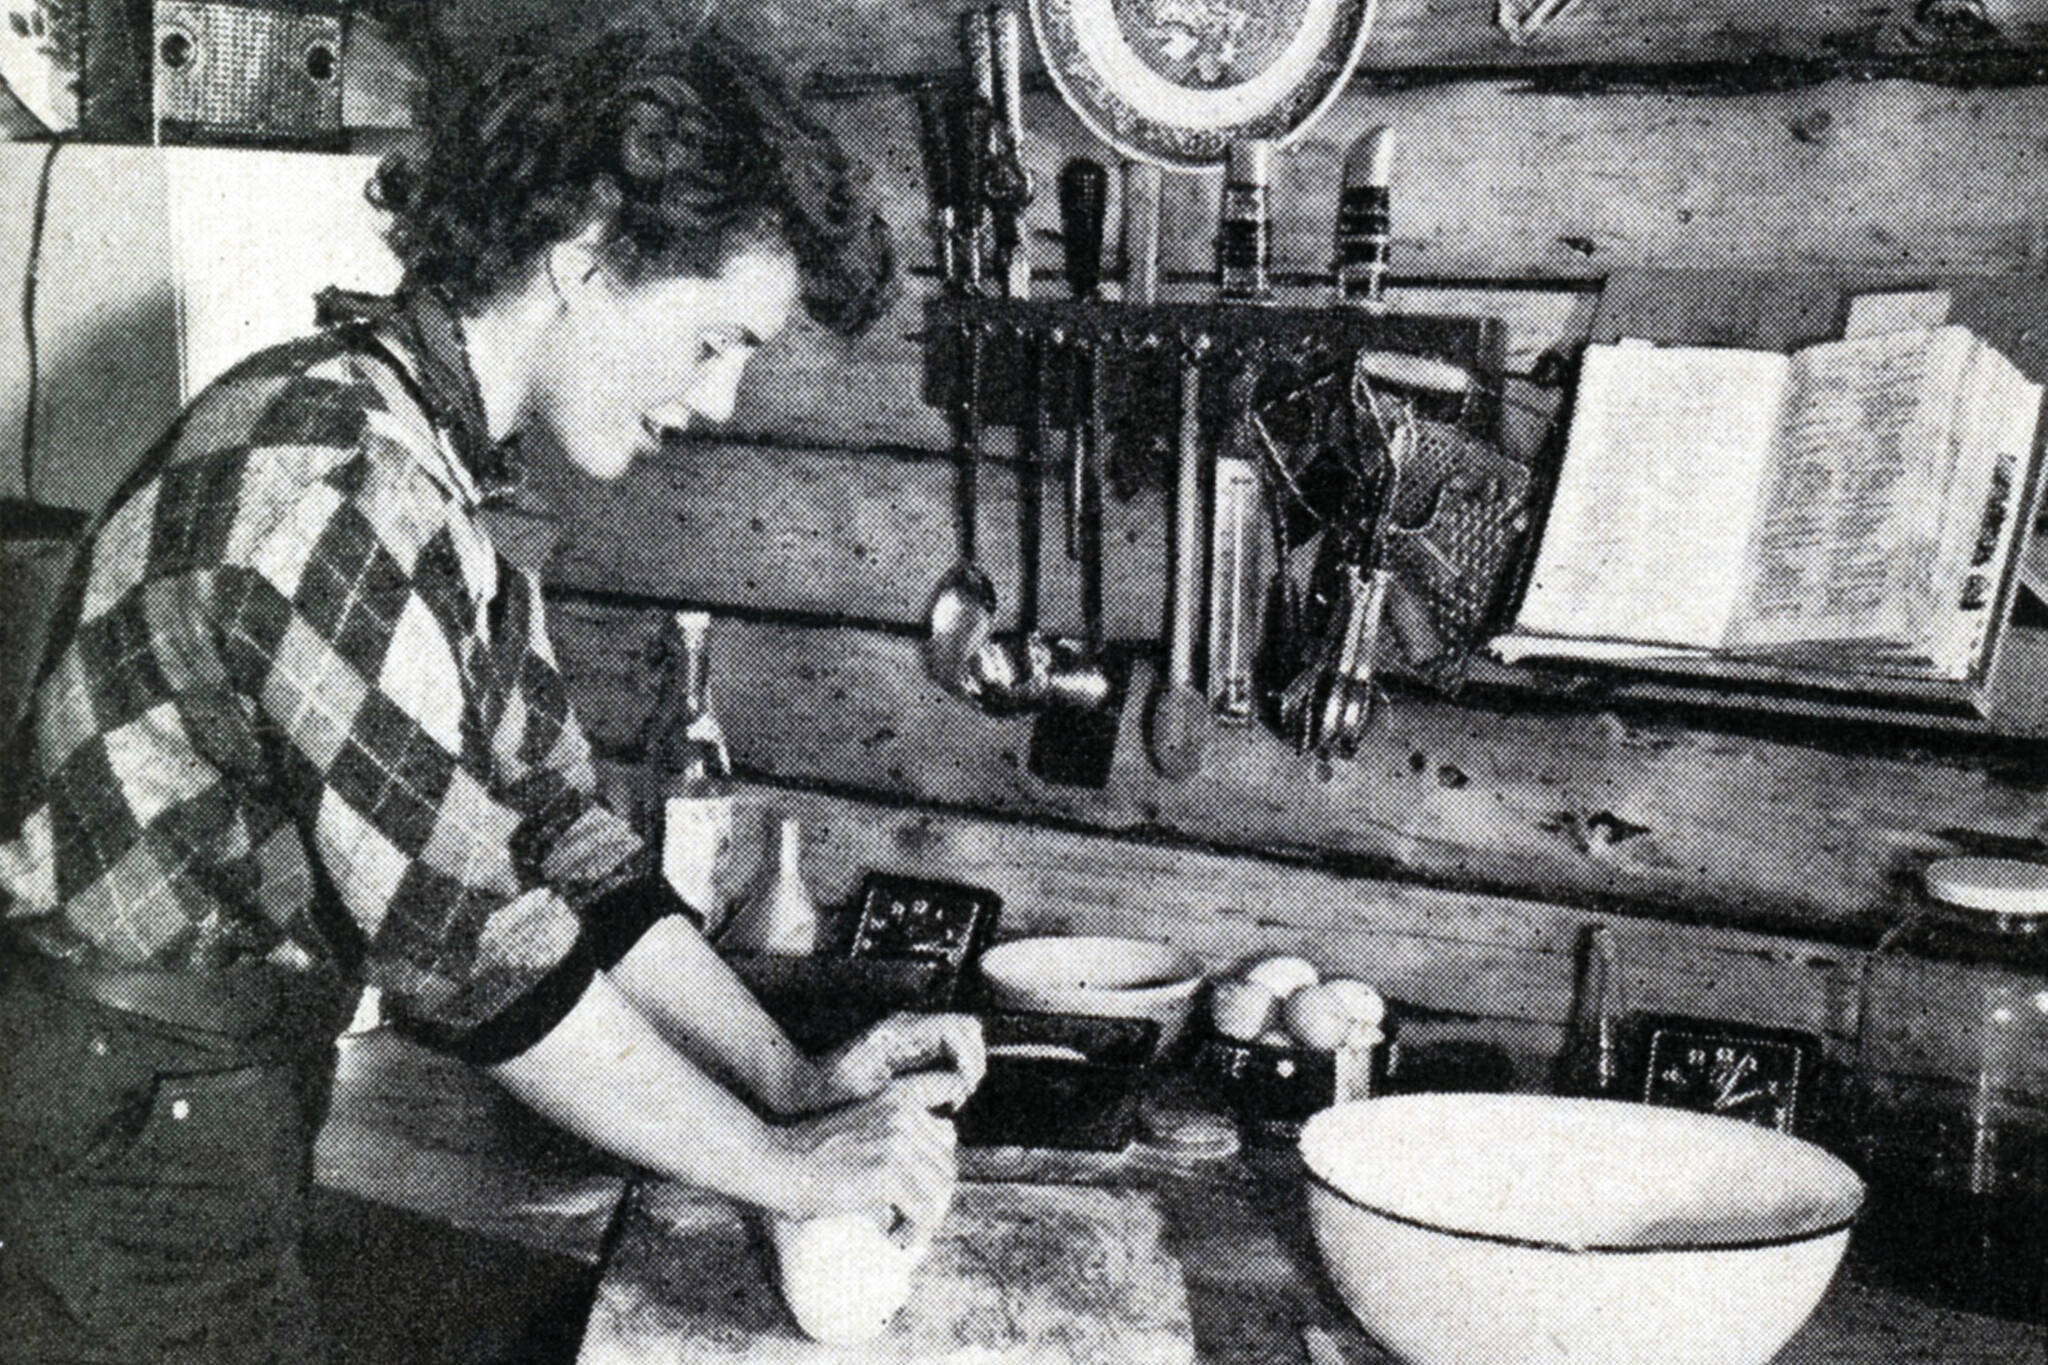 Rusty Lancashire kneads bread dough in her kitchen. (1954 photo by Bob and Ira Spring for Better Homes & Garden magazine)